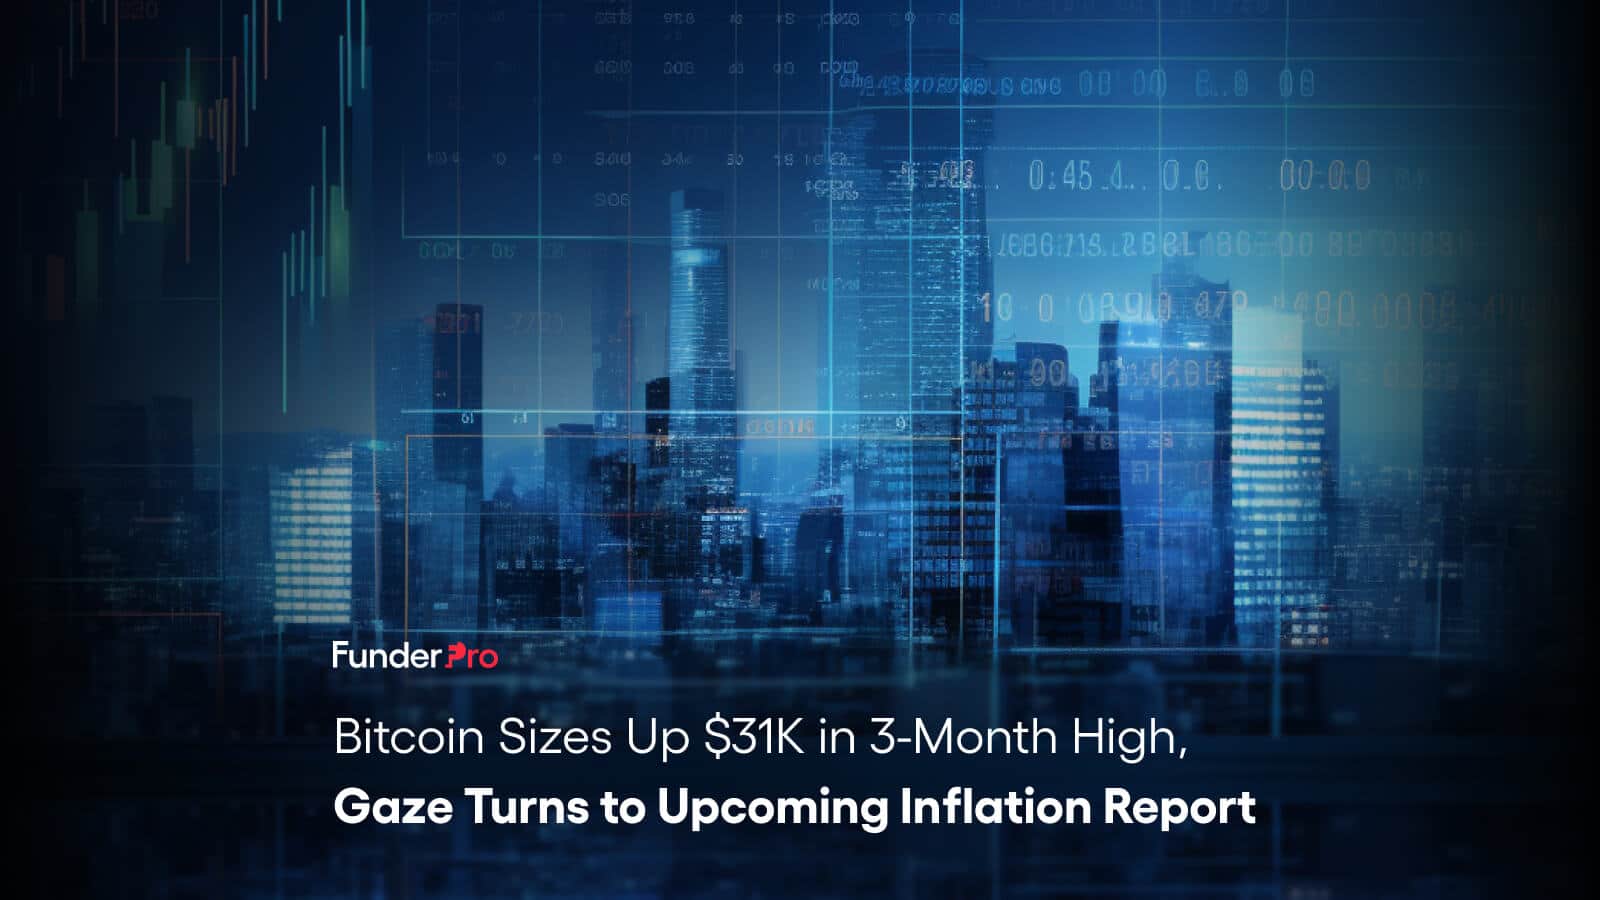 Bitcoin Sizes Up $31K in 3-Month High, Gaze Turns to Upcoming Inflation Report